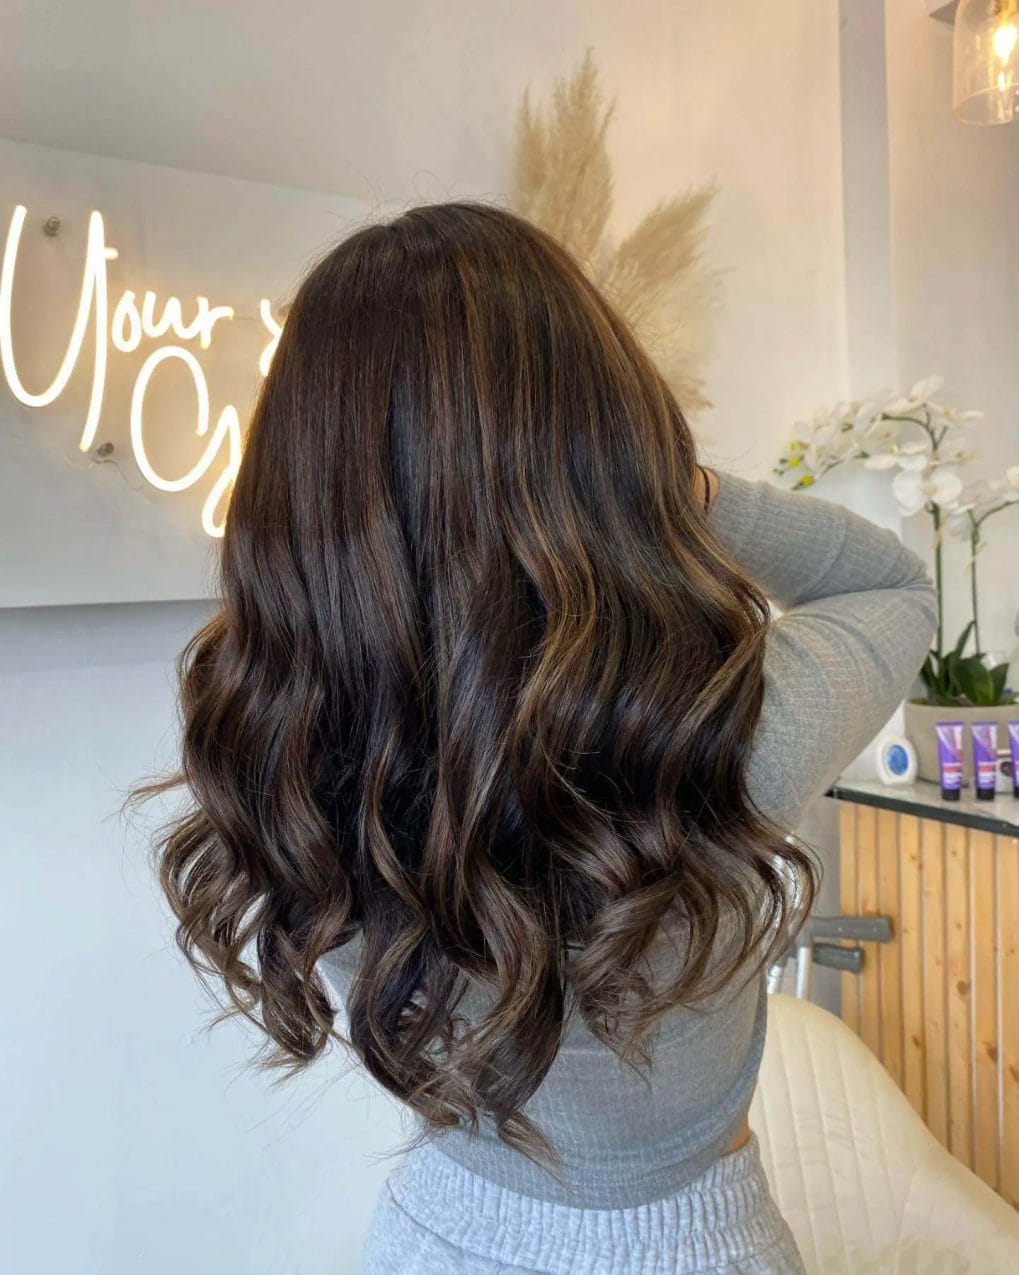 Curls in chocolate to caramel balayage, reflecting a cozy winter evening by the fire.